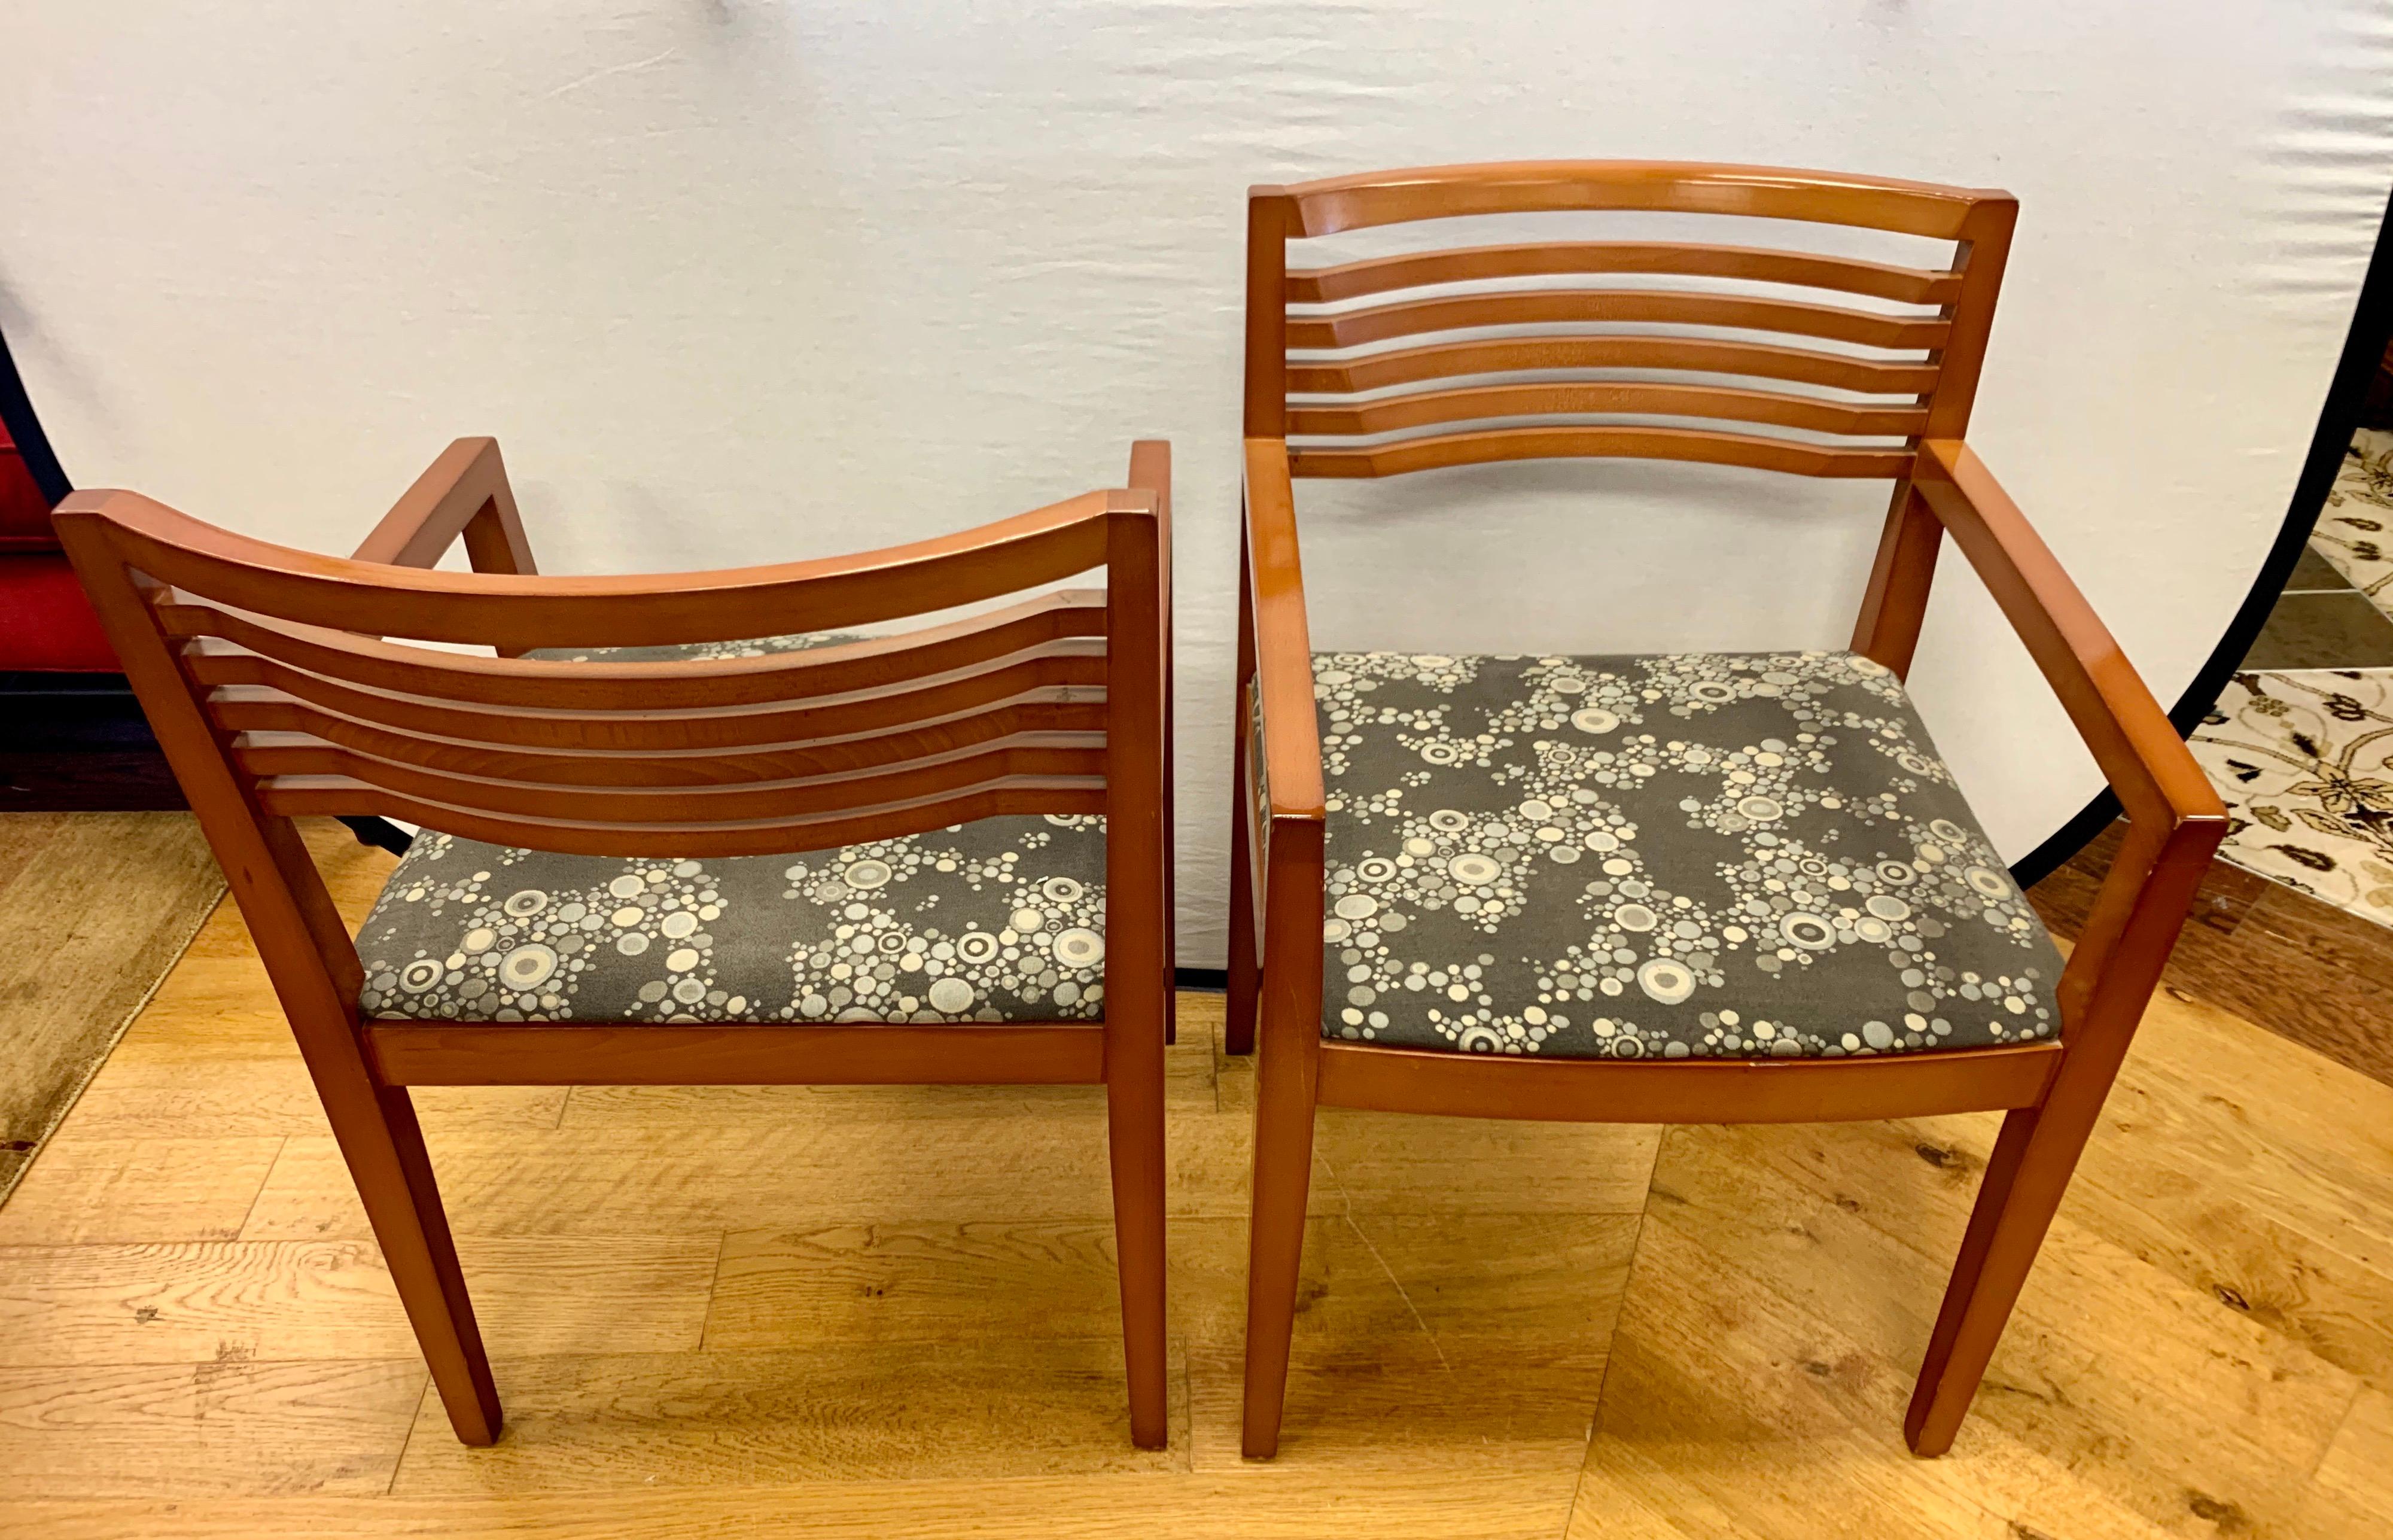 Set of eight Knoll Studio Ricchio armchairs designed by Joseph and Linda Ricchio in 1990. The chairs are done in a medium beechwood finish and have a gorgeous Knoll fabric on the seat which gives it an iconic midcentury look. The chairs retain the